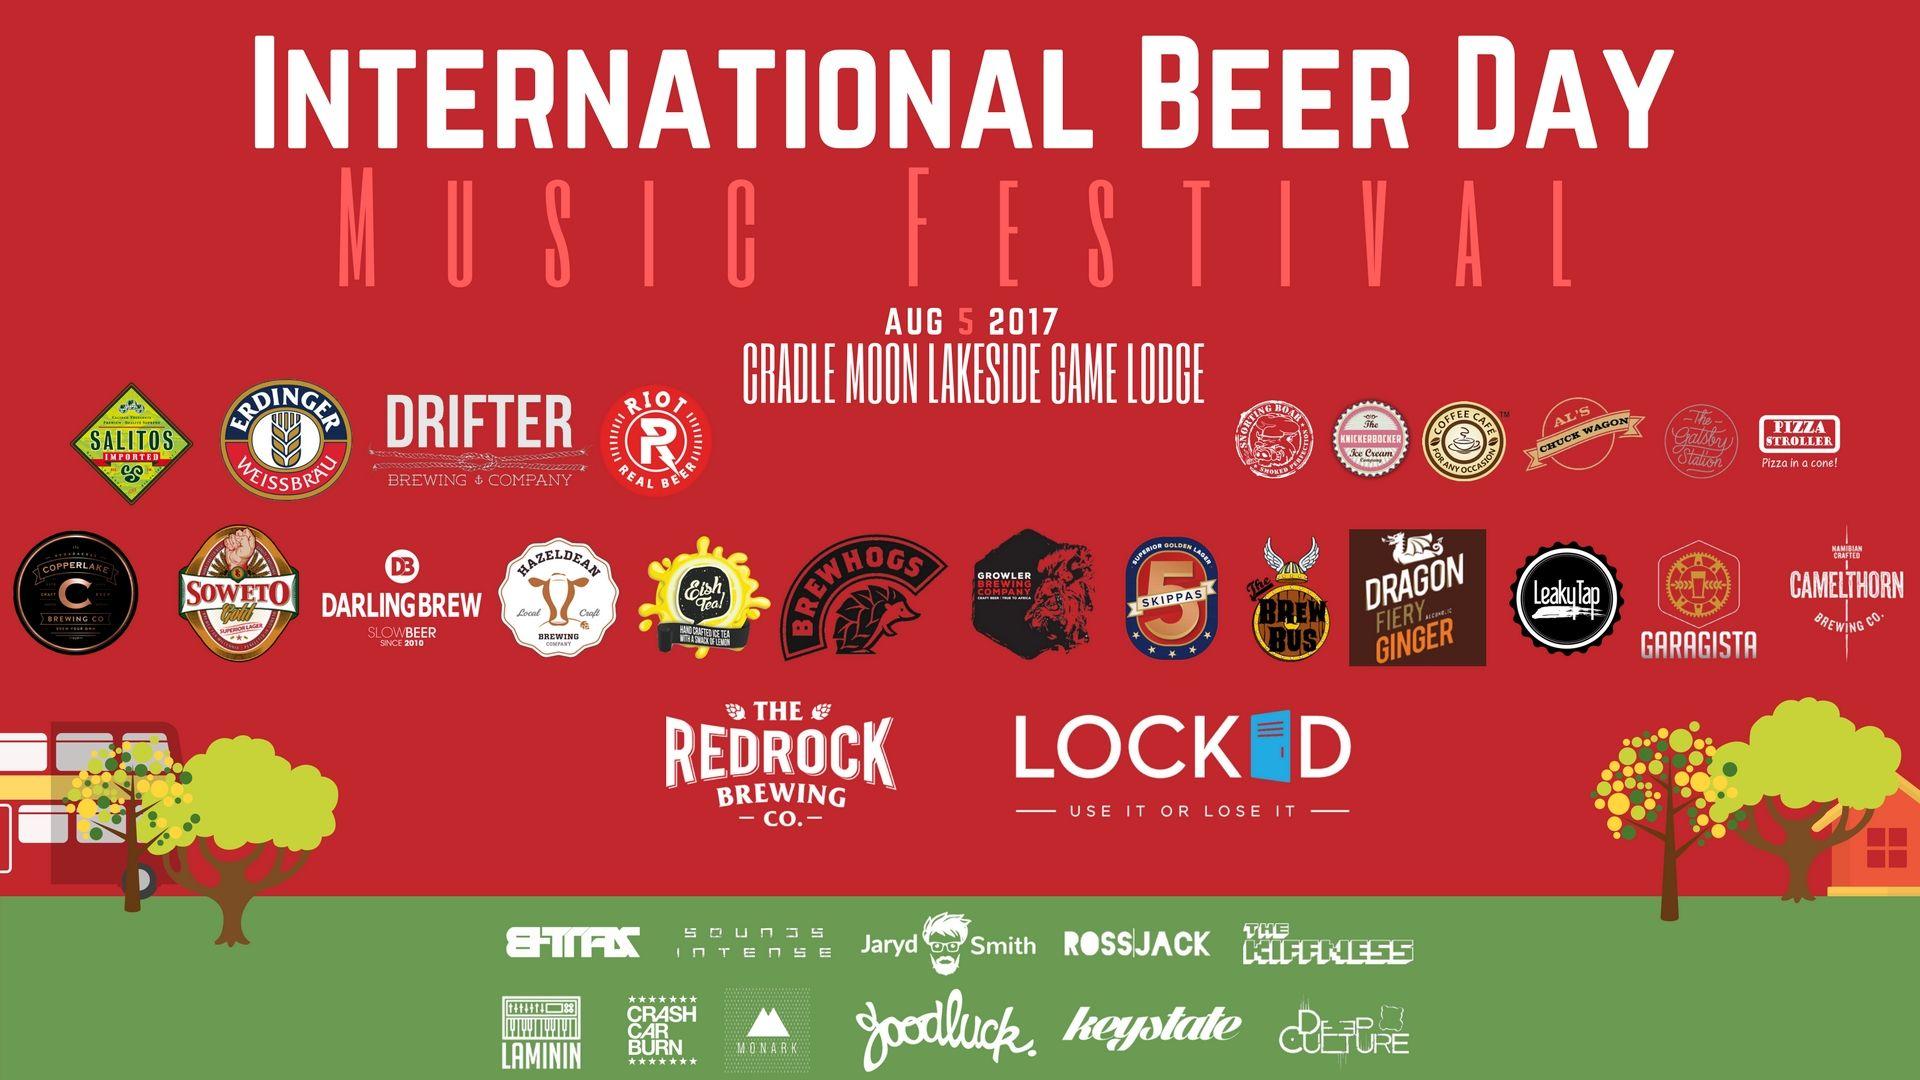 Join The First Ever International Beer Day Music Festival On